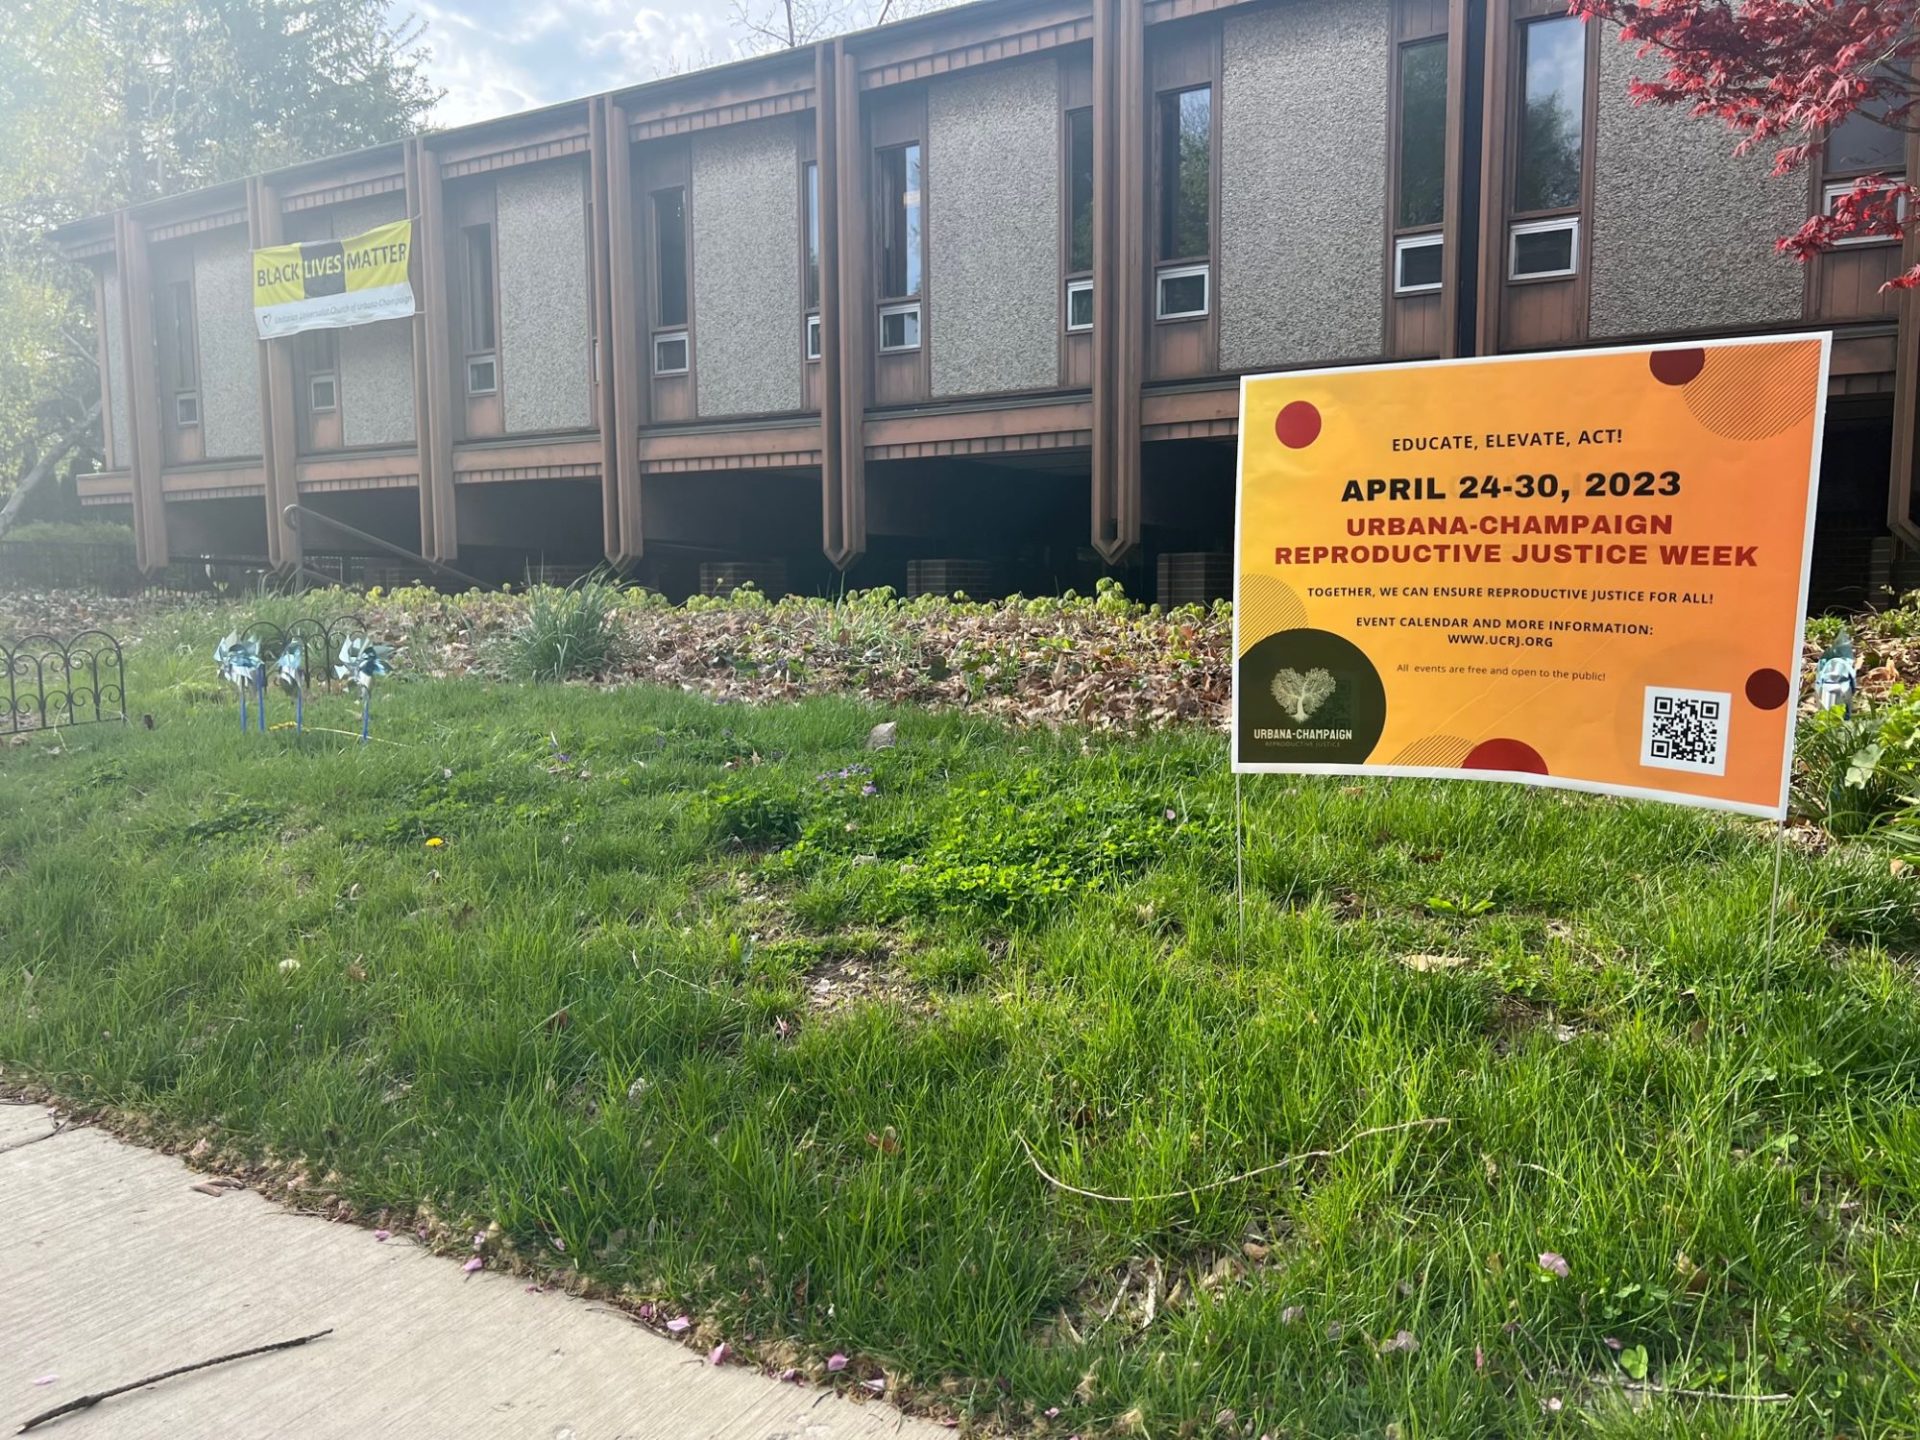 A golden yellow yard sign that says April 24-20 in black lettering, and Urbana-Champaign Reproductive Justice Week in red letters. It's in a patch of grass in front of a one story brown building with a row of large windows in front.